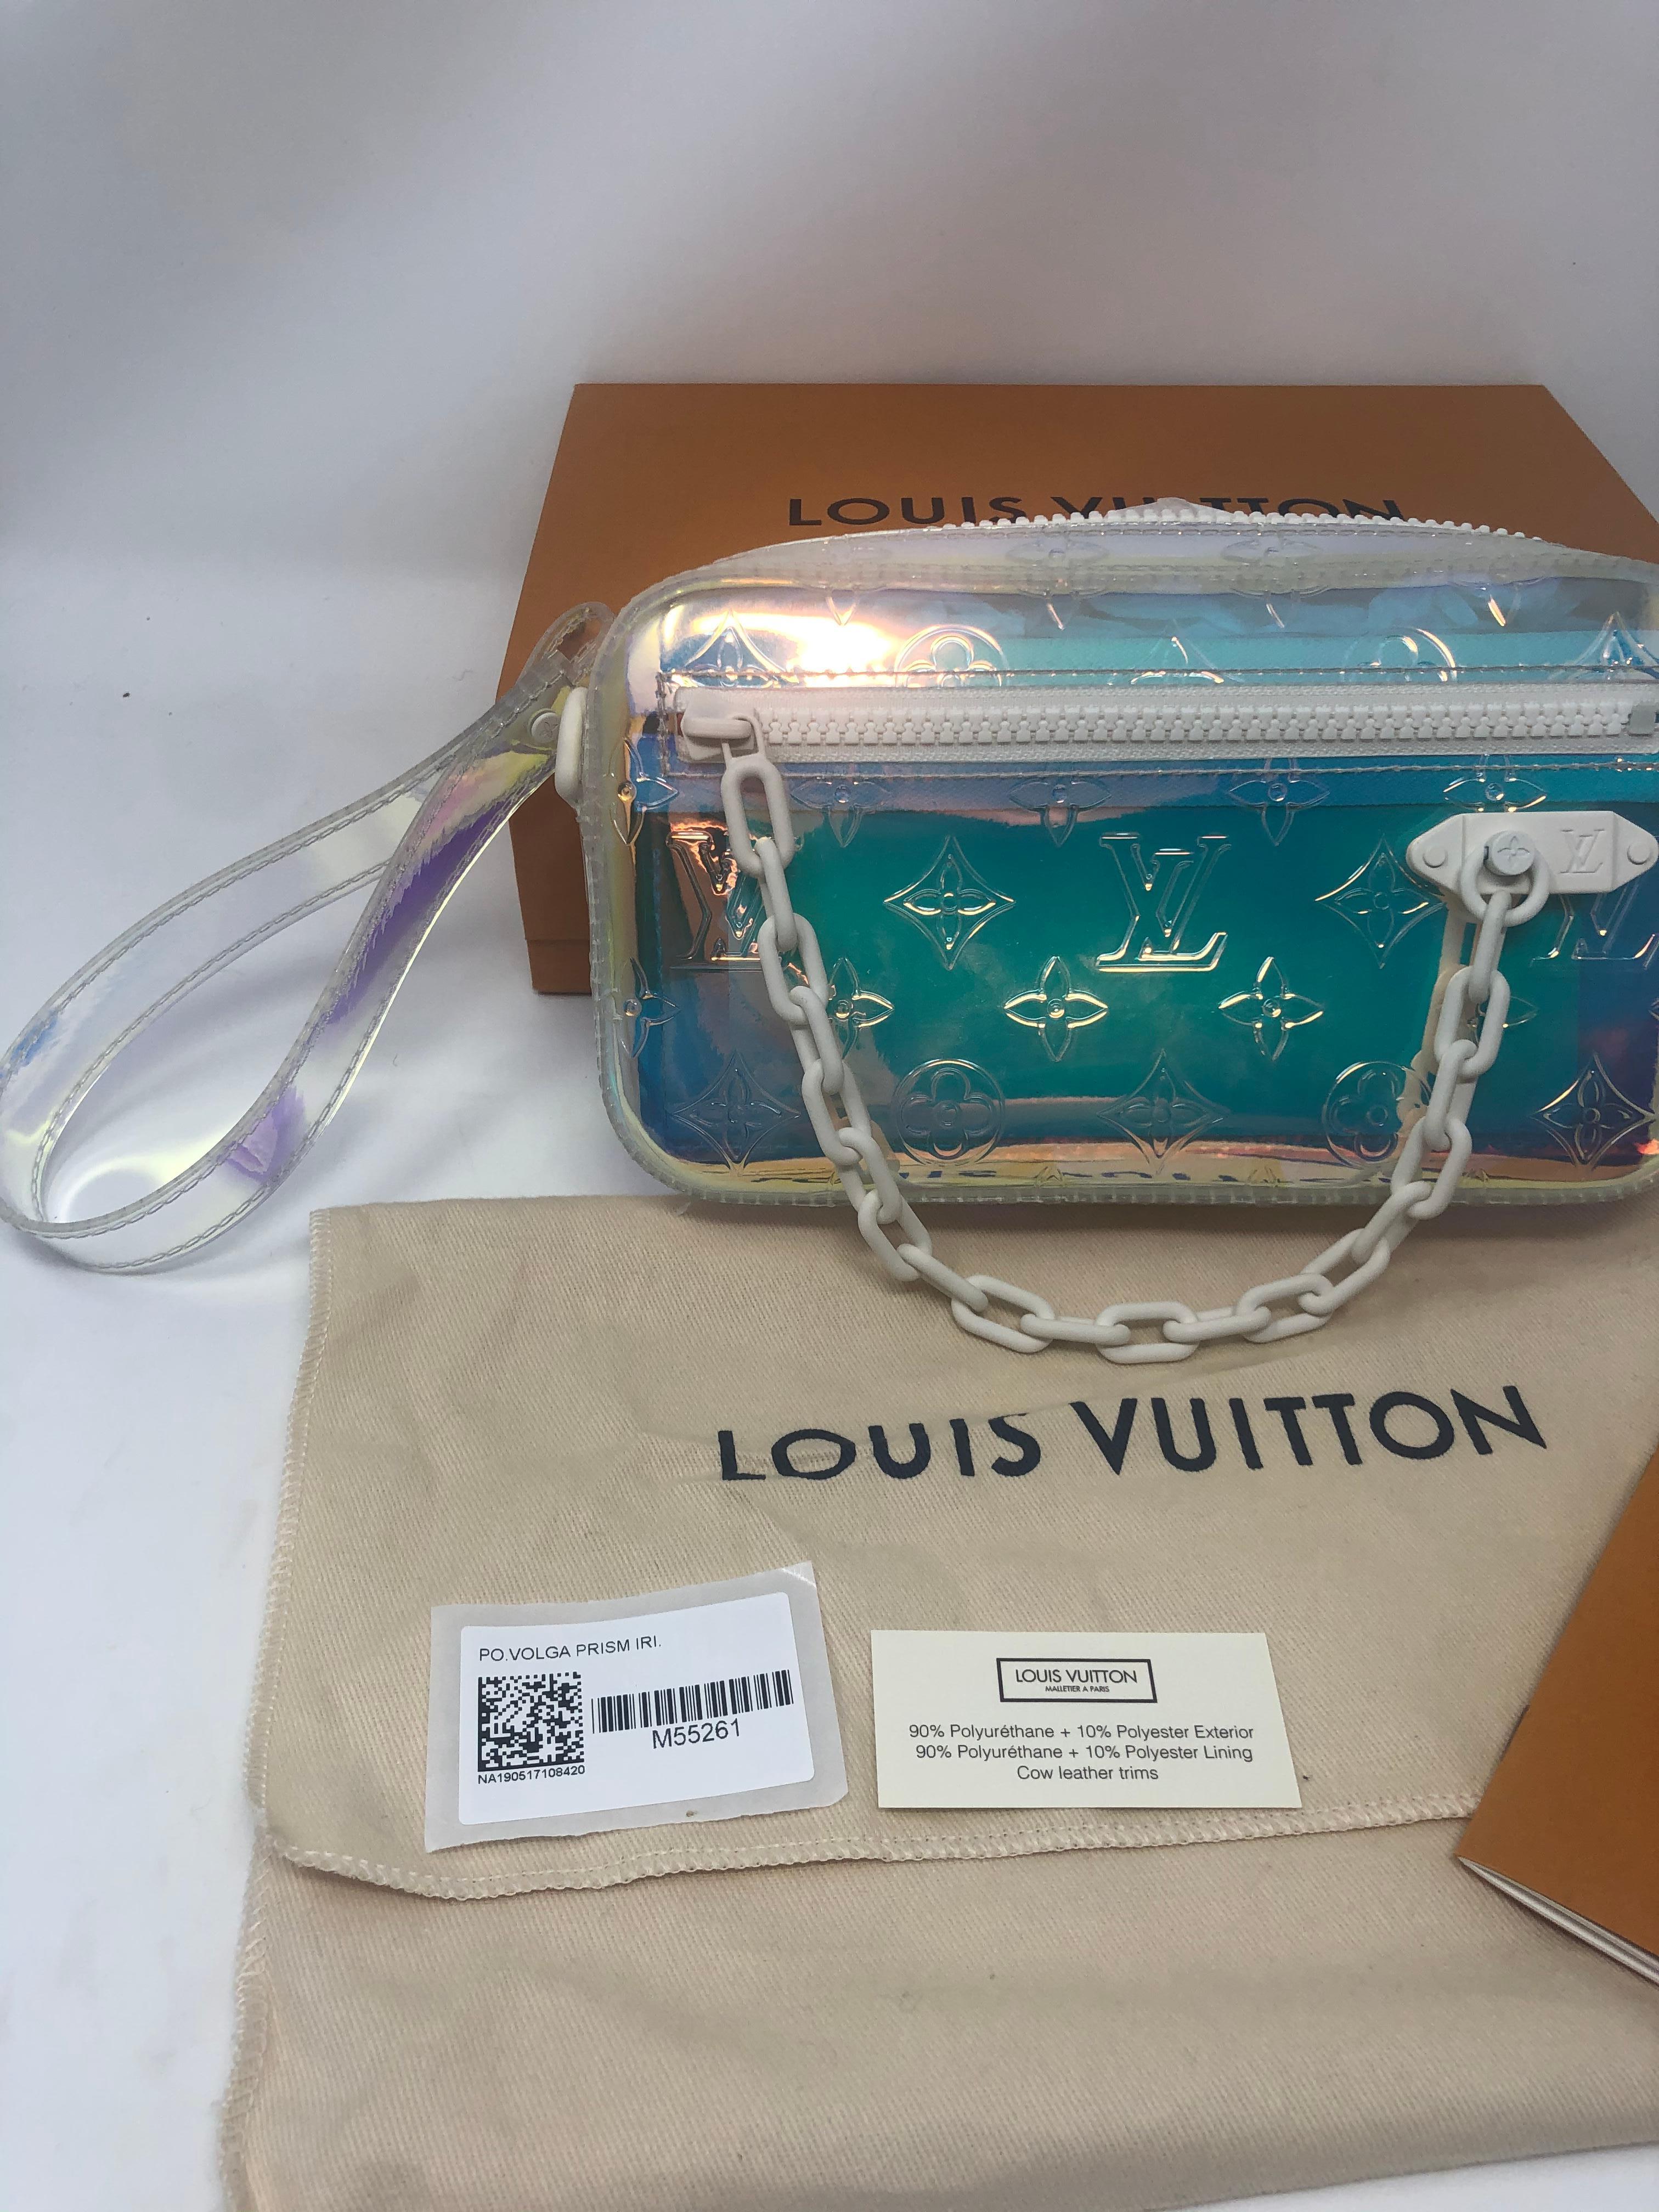 Louis Vuitton Virgil Abloh Prism Clutch. Brand new with tags. Sold out and limited. Includes original LV dust cover and box. Guaranteed authentic. 